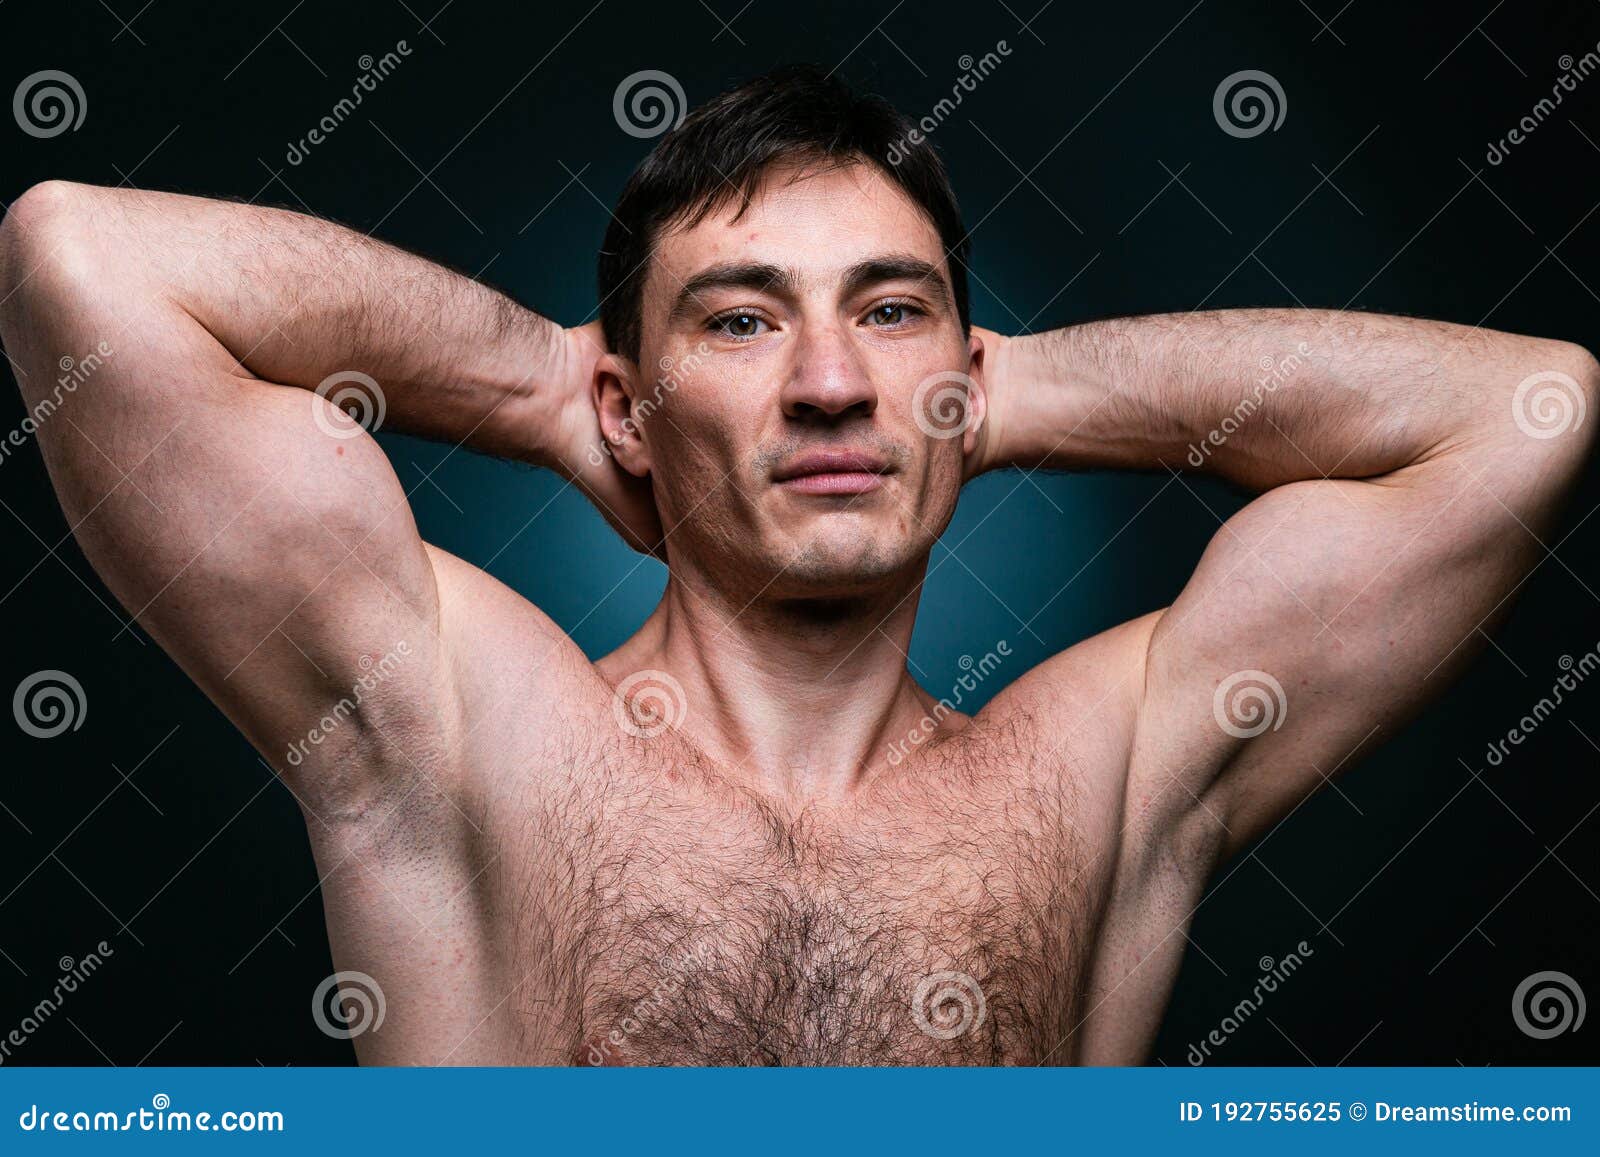 Naked athlete pics 24 469 Naked Athlete Photos Free Royalty Free Stock Photos From Dreamstime